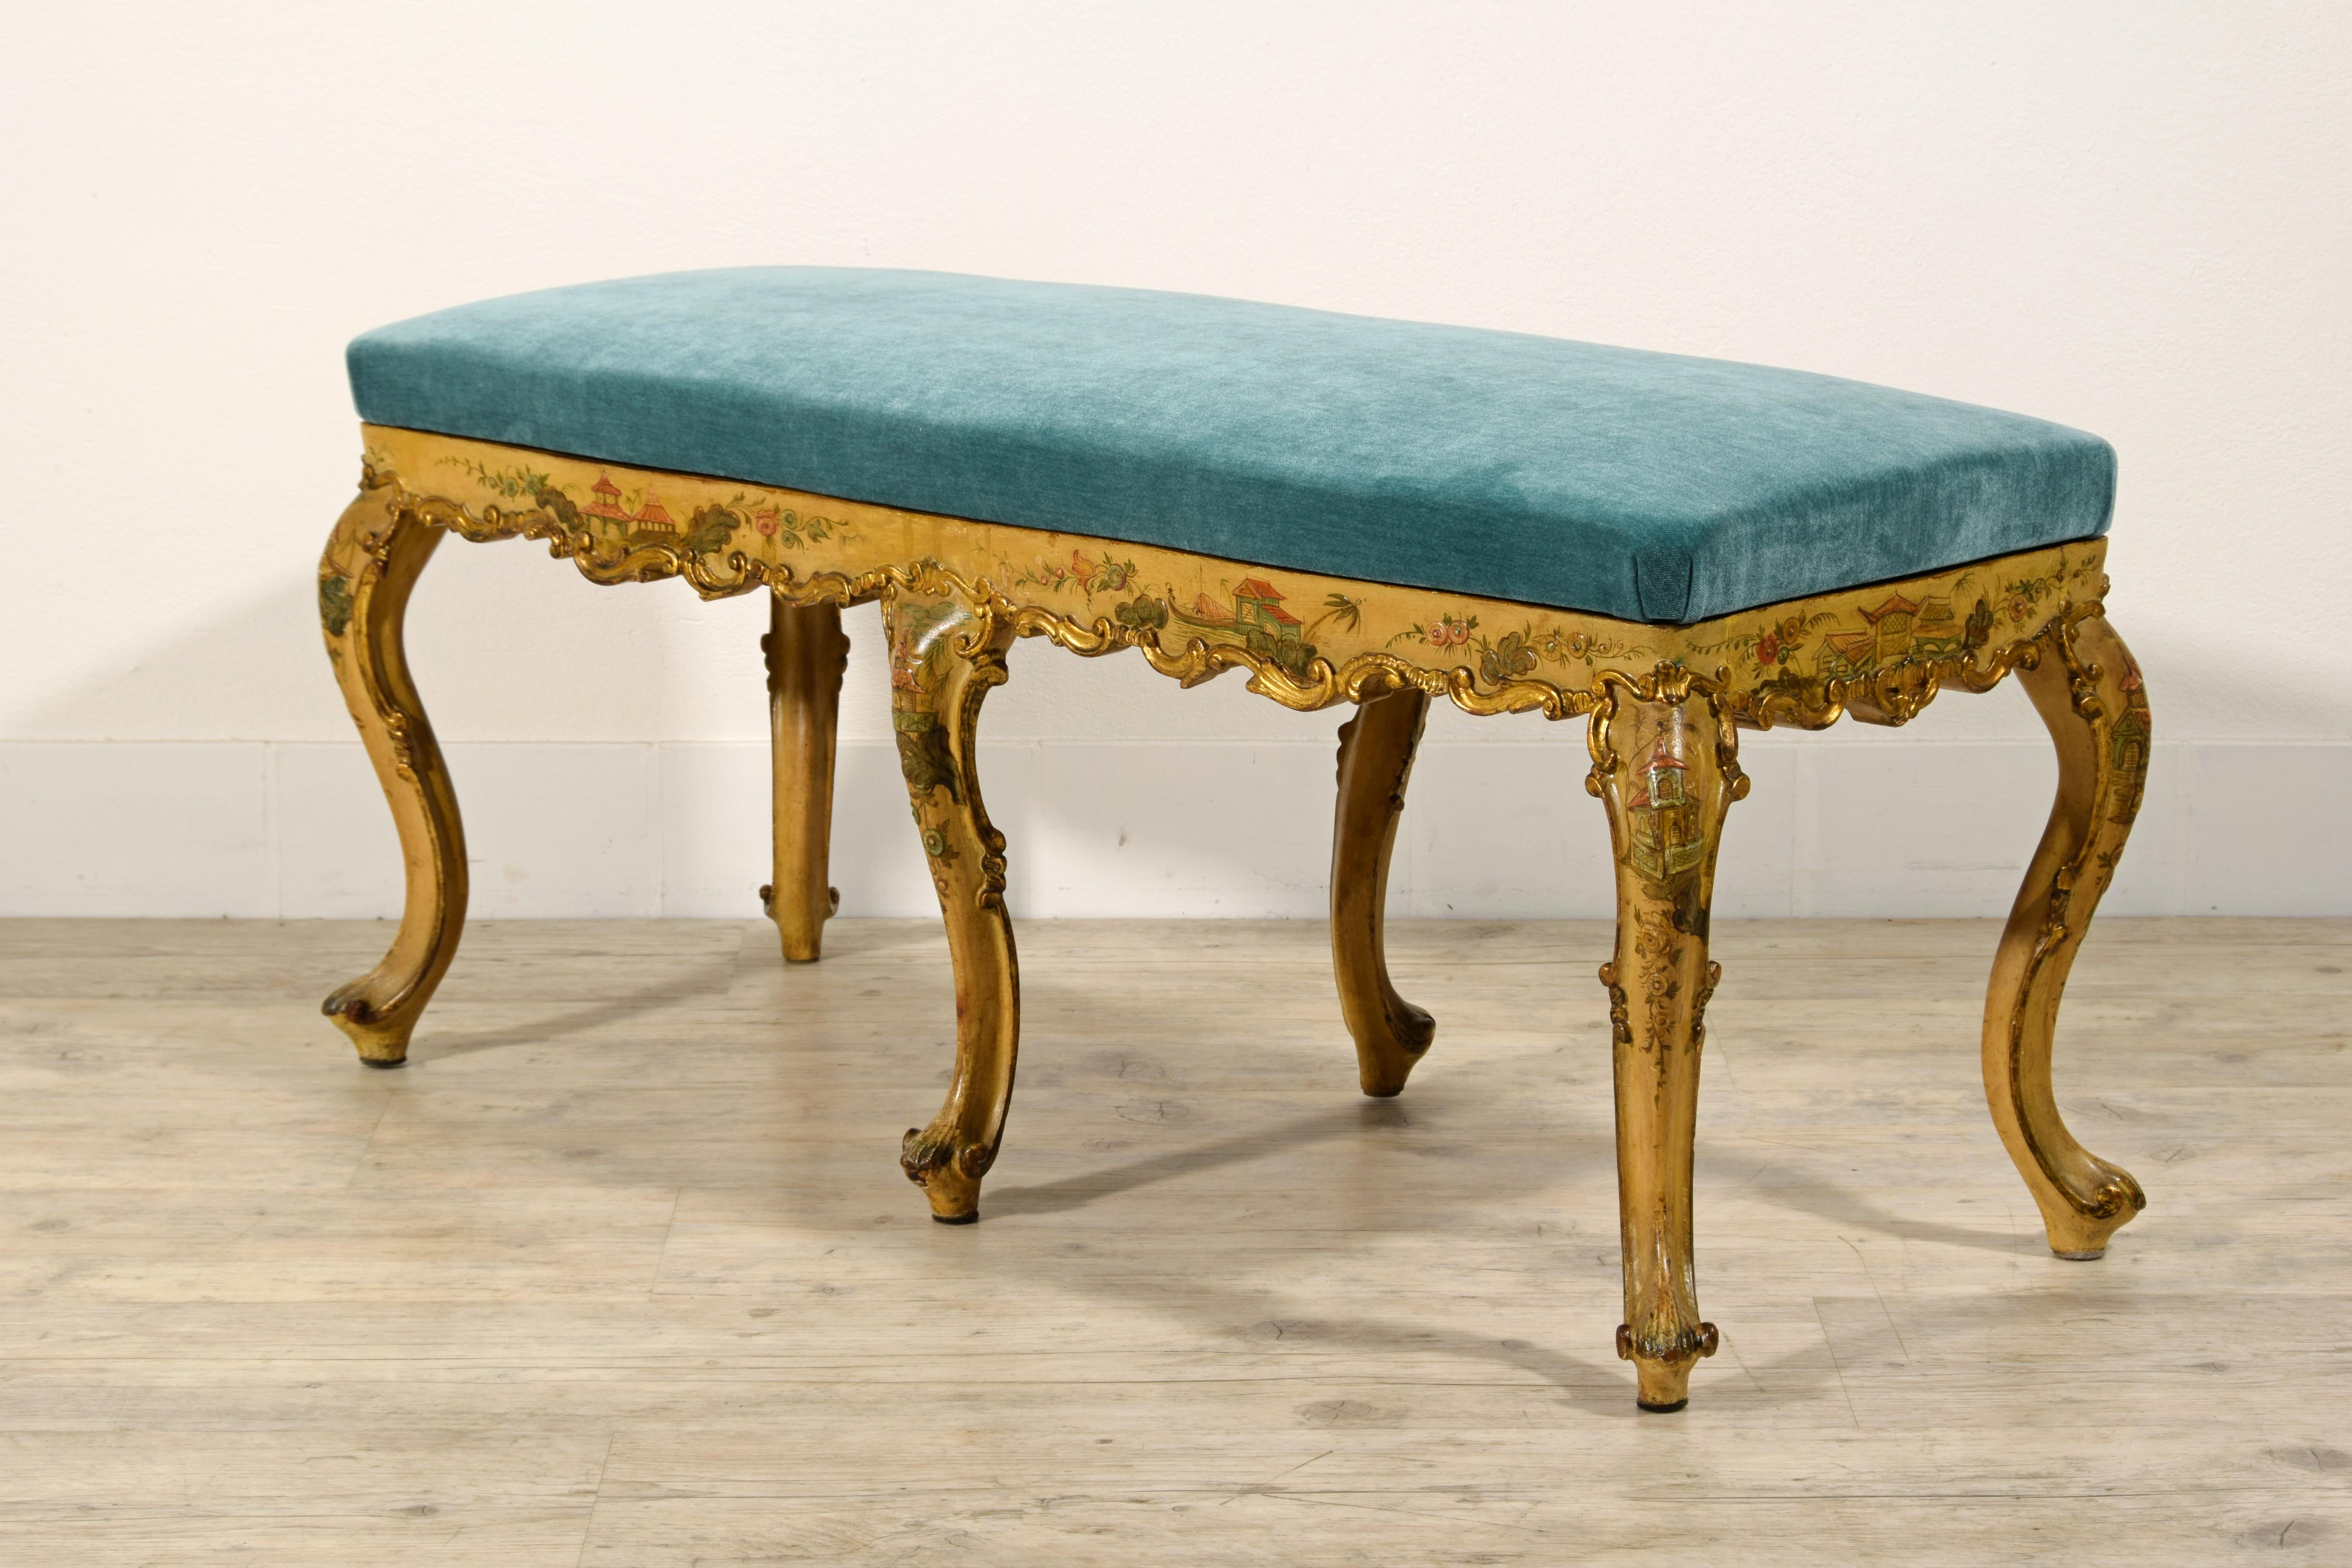 20th Century, Venetian Baroque Stile Carved and Laquered Giltwood Bench For Sale 2